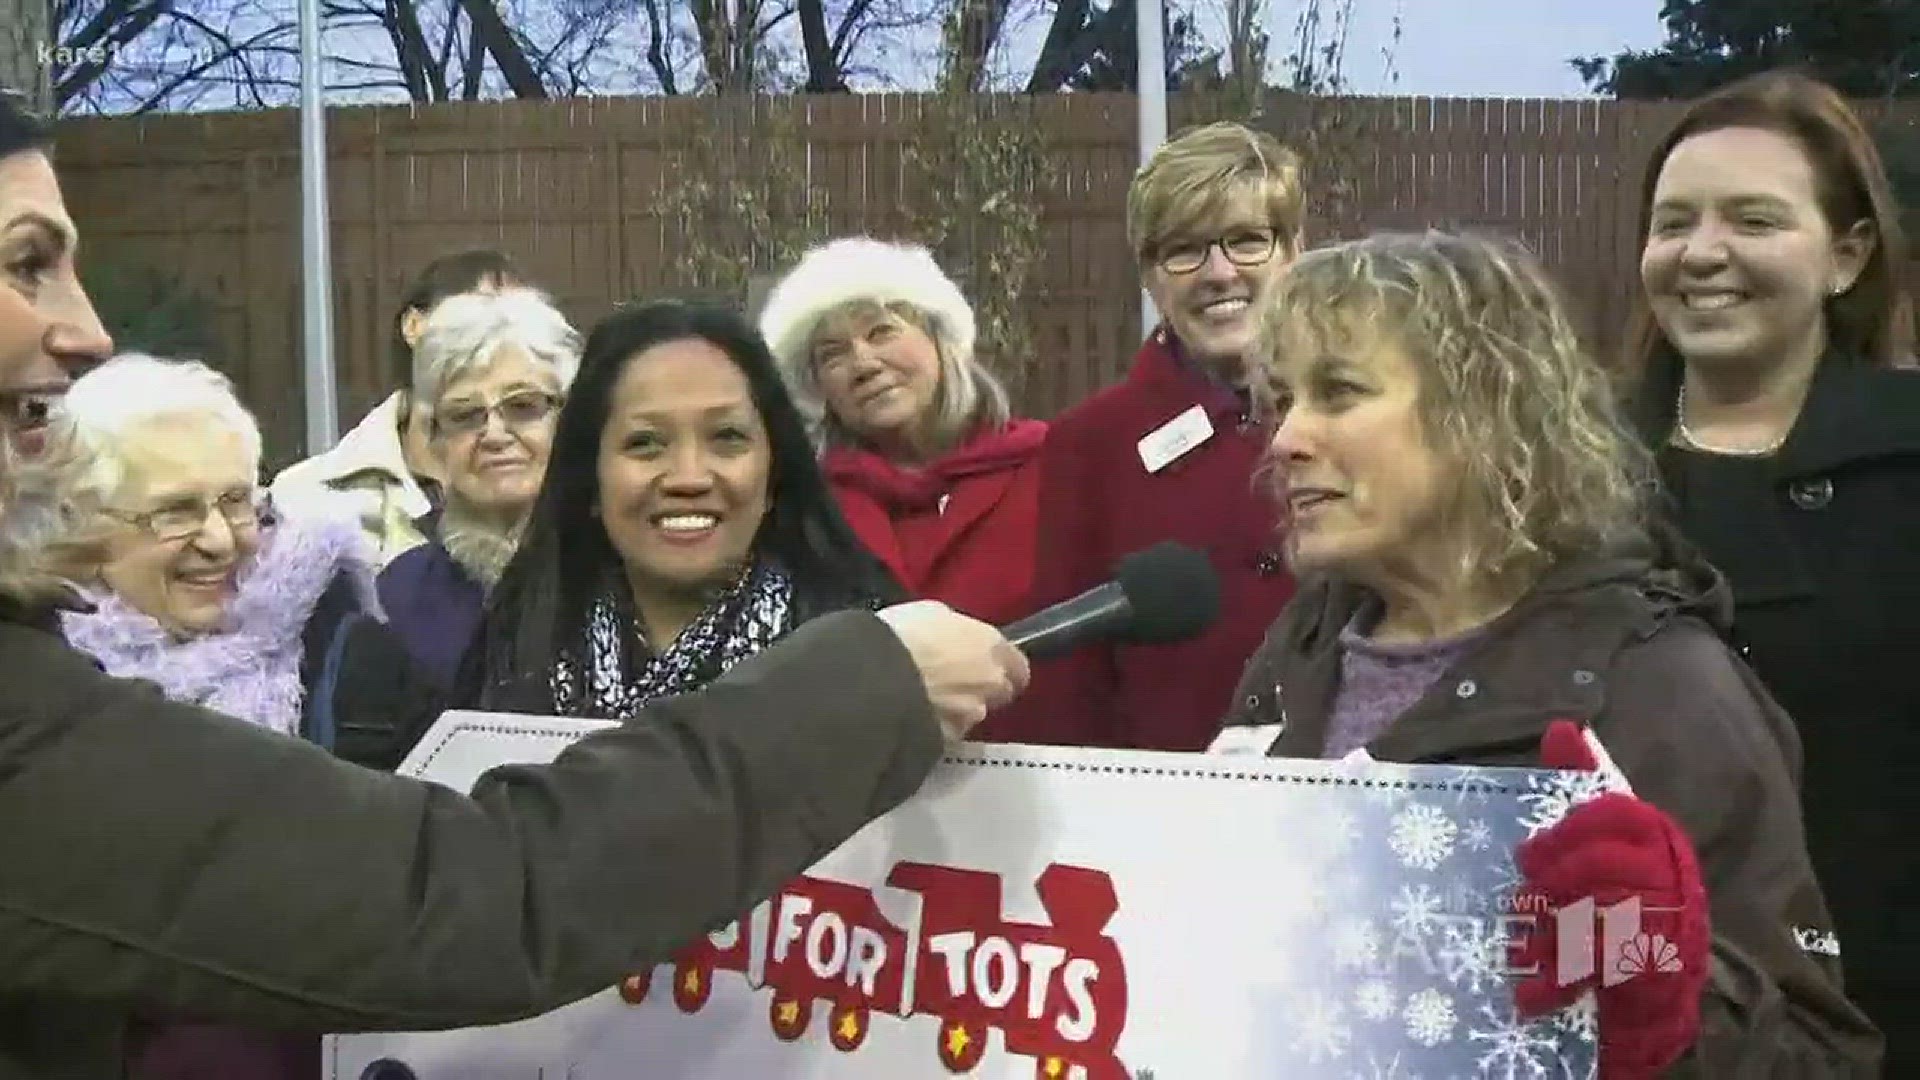 Toys for Tots 12-14-17 4 p.m.